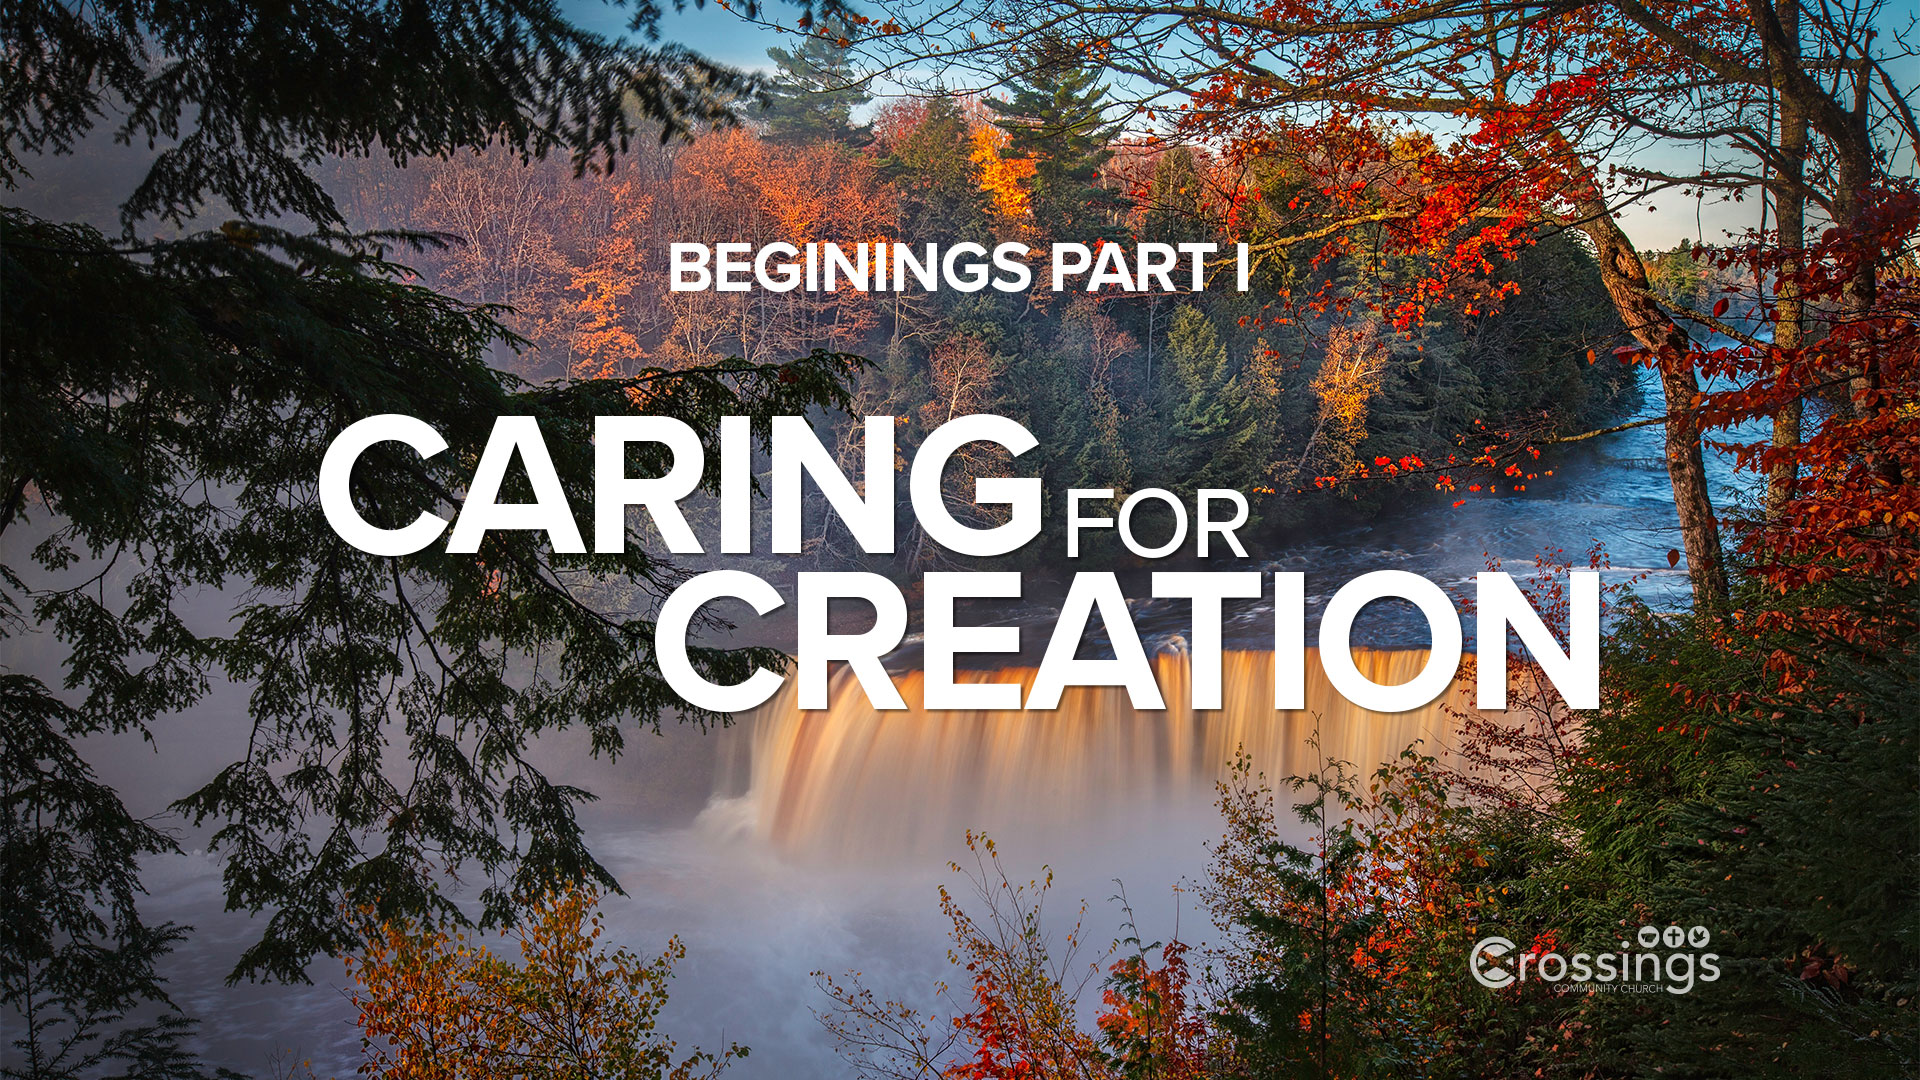 Caring for Creation is Biblical